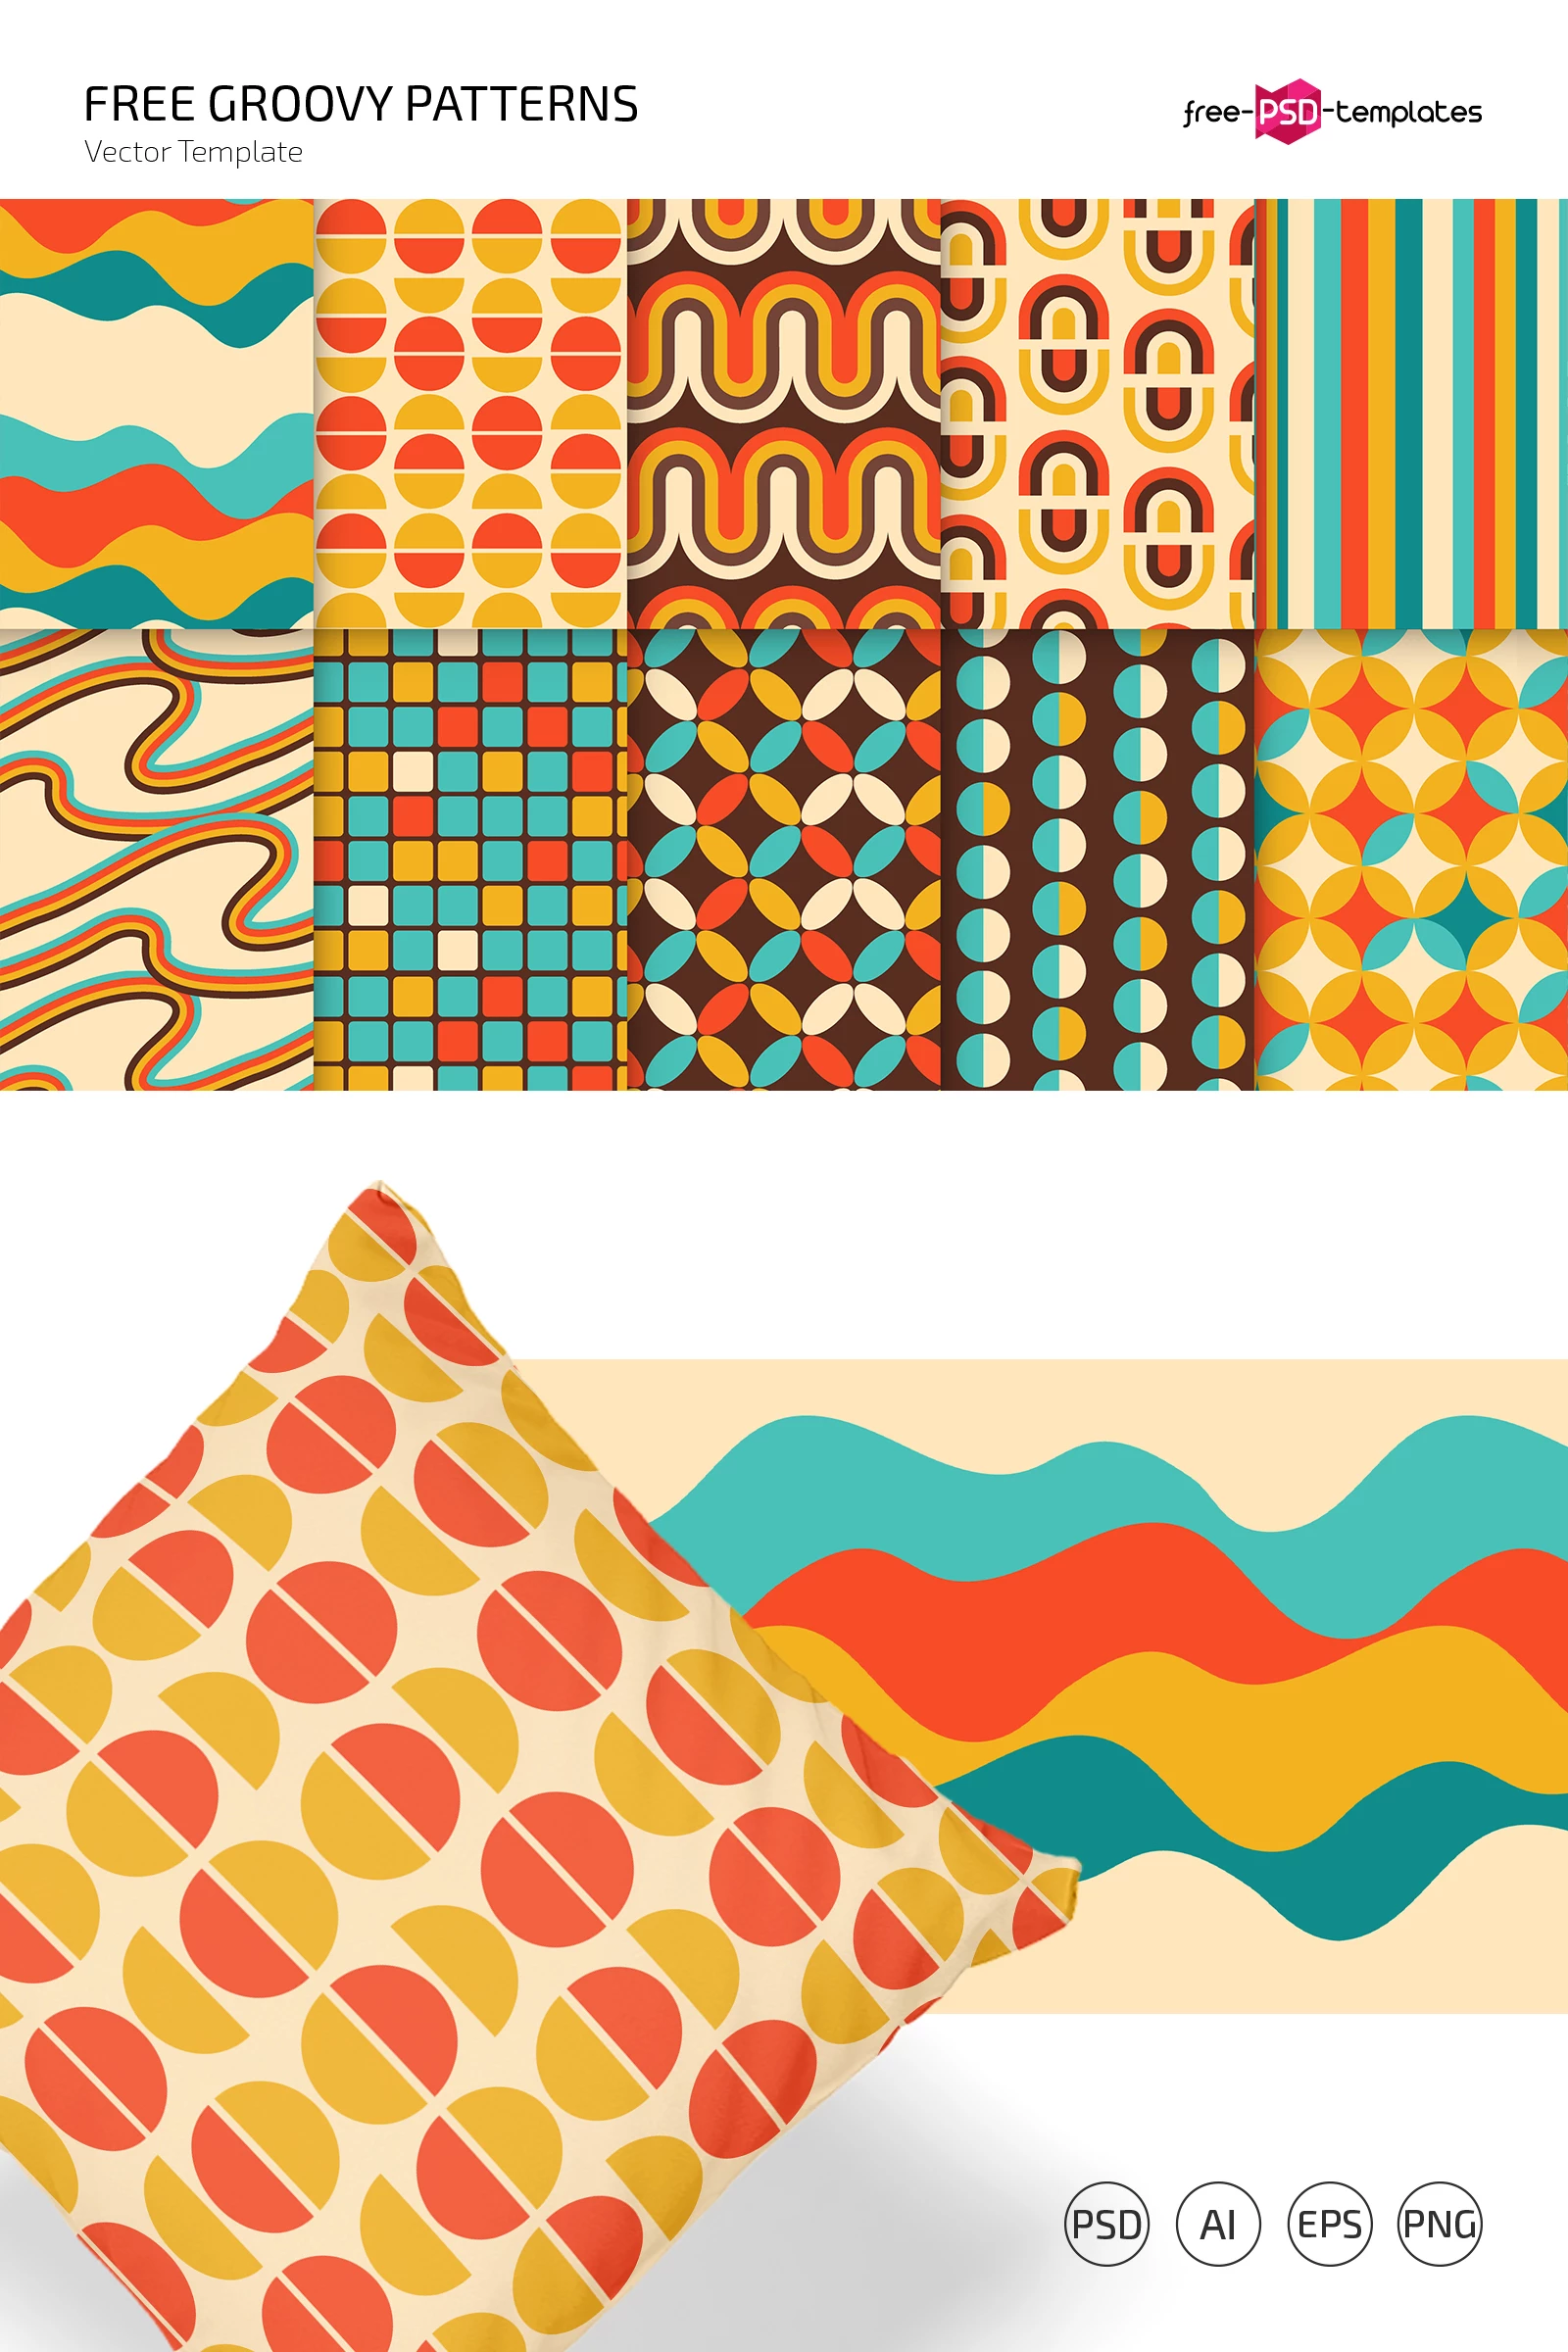 Free Groovy Pattern Set (PSD, AI, EPS, PNG)